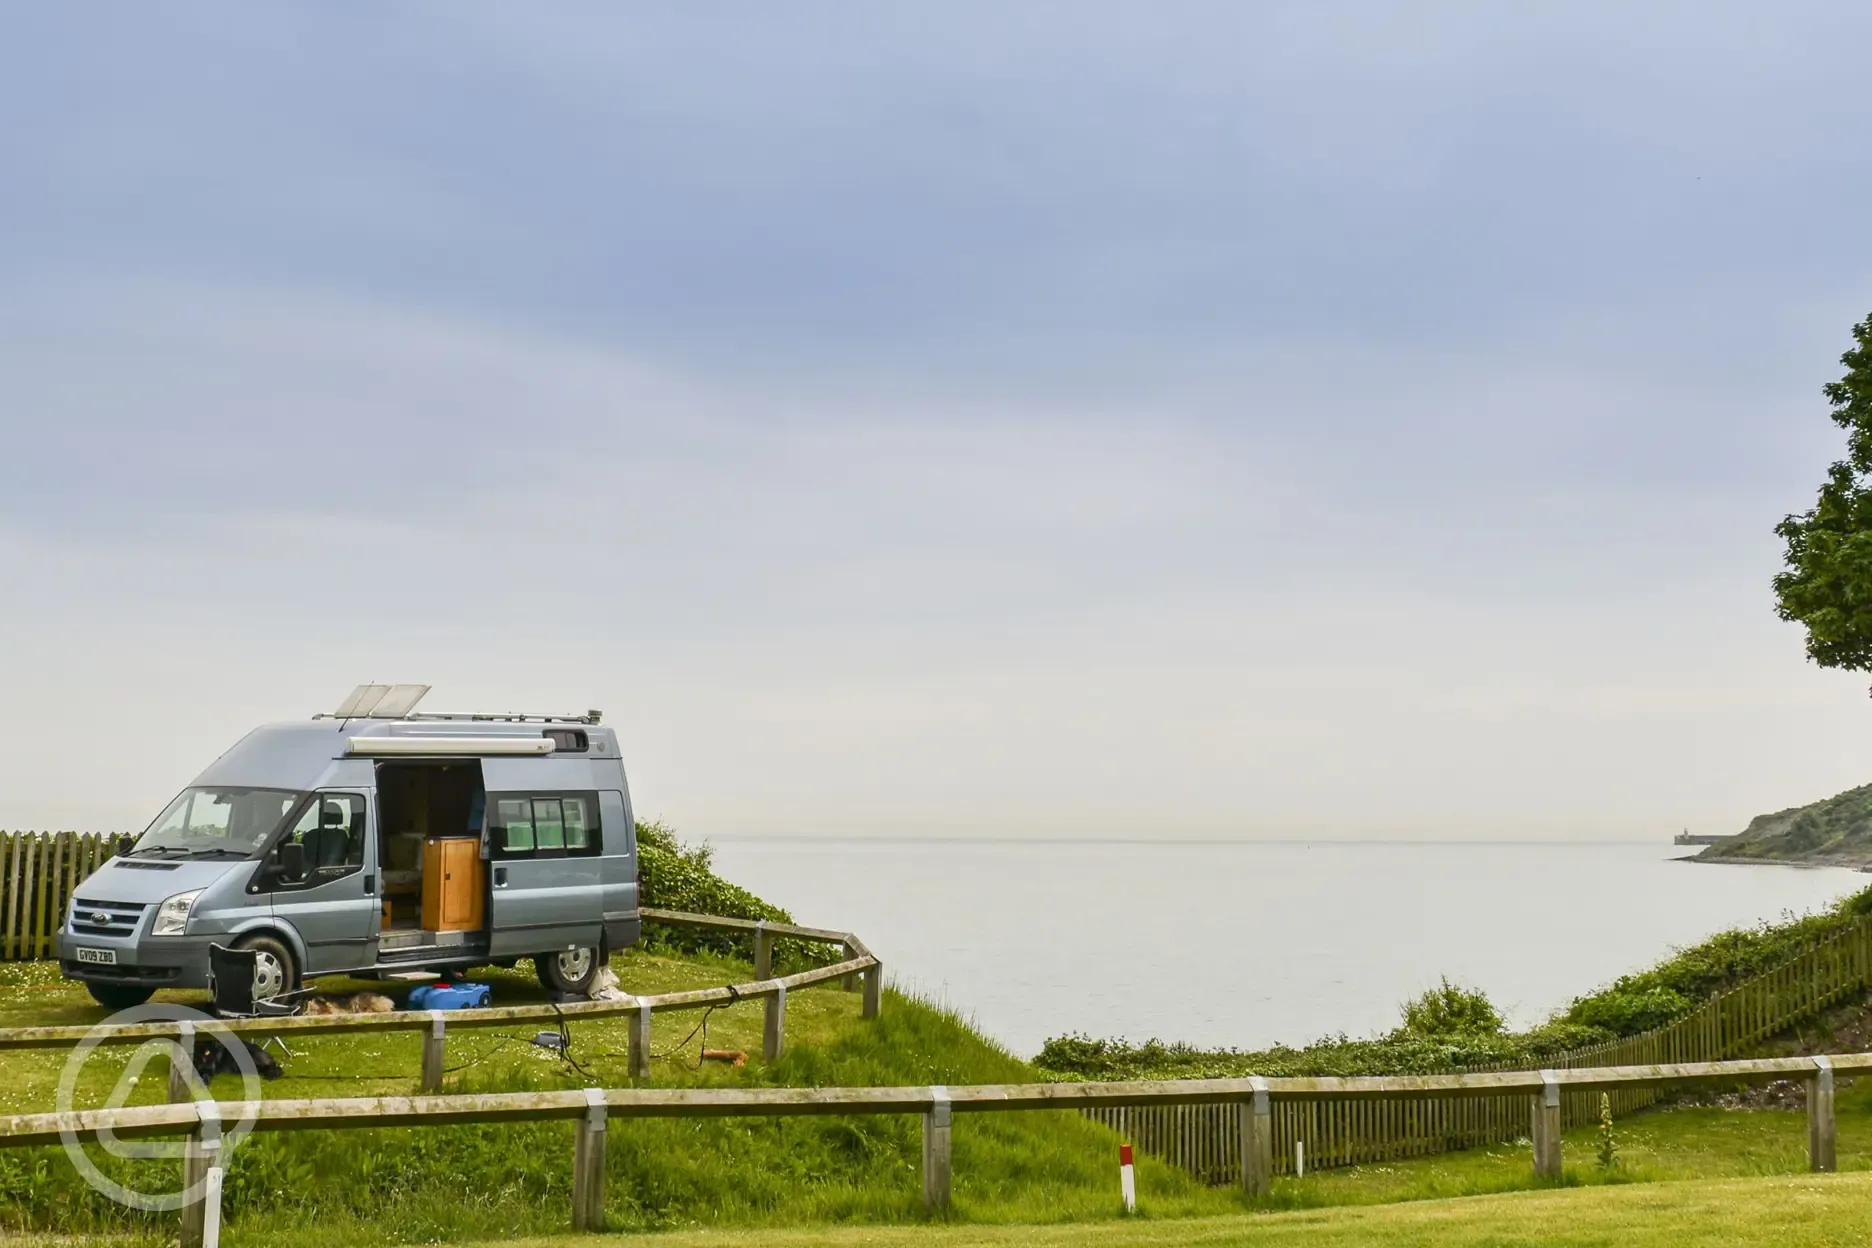 Folkestone Camping and Caravanning